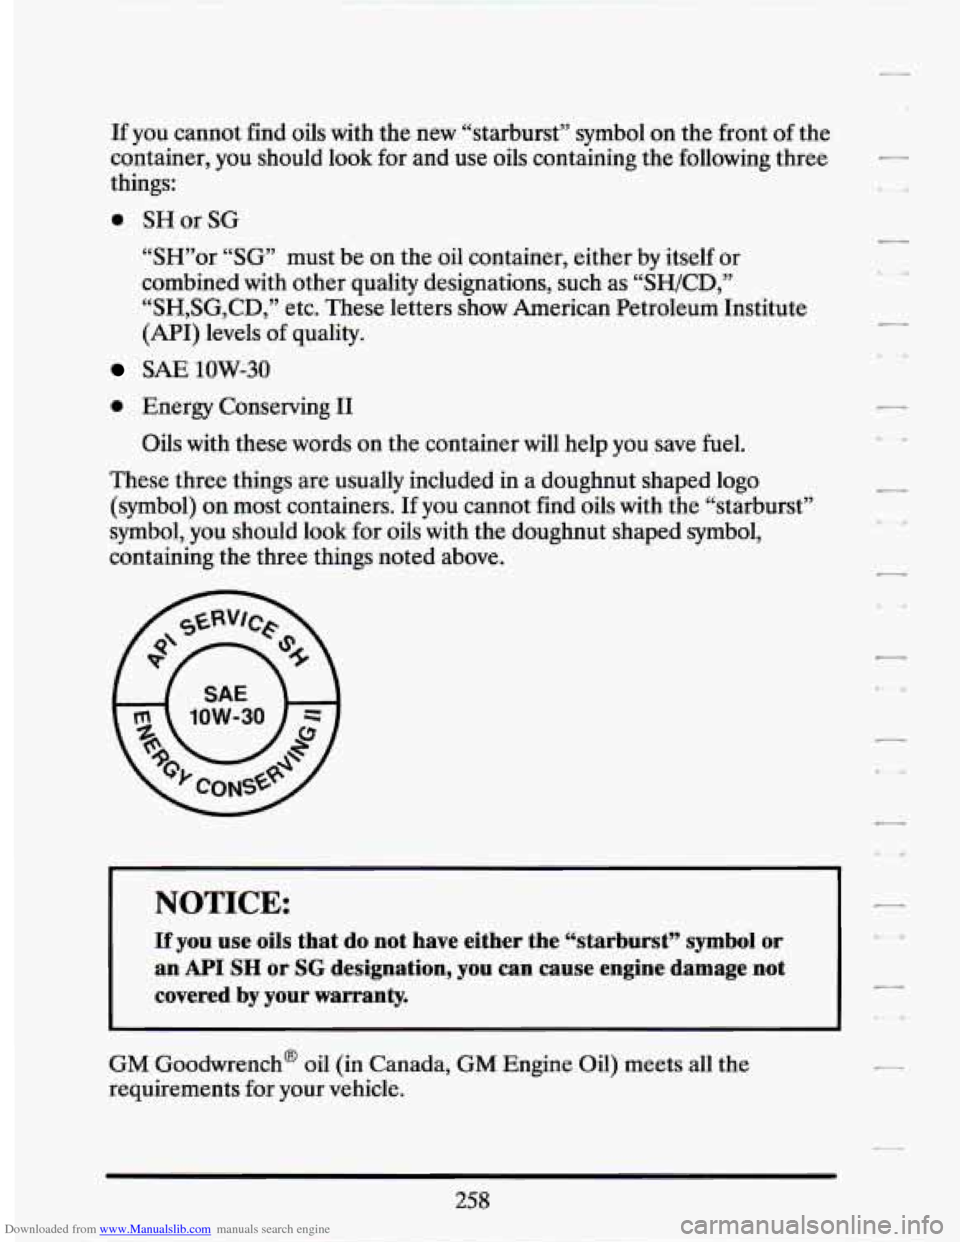 CADILLAC SEVILLE 1994 4.G Owners Manual Downloaded from www.Manualslib.com manuals search engine If you cannot  find  oils  with  the new  “starburst”  symbol on  the  front of the 
container,  you  should  look  for and use  oils  cont